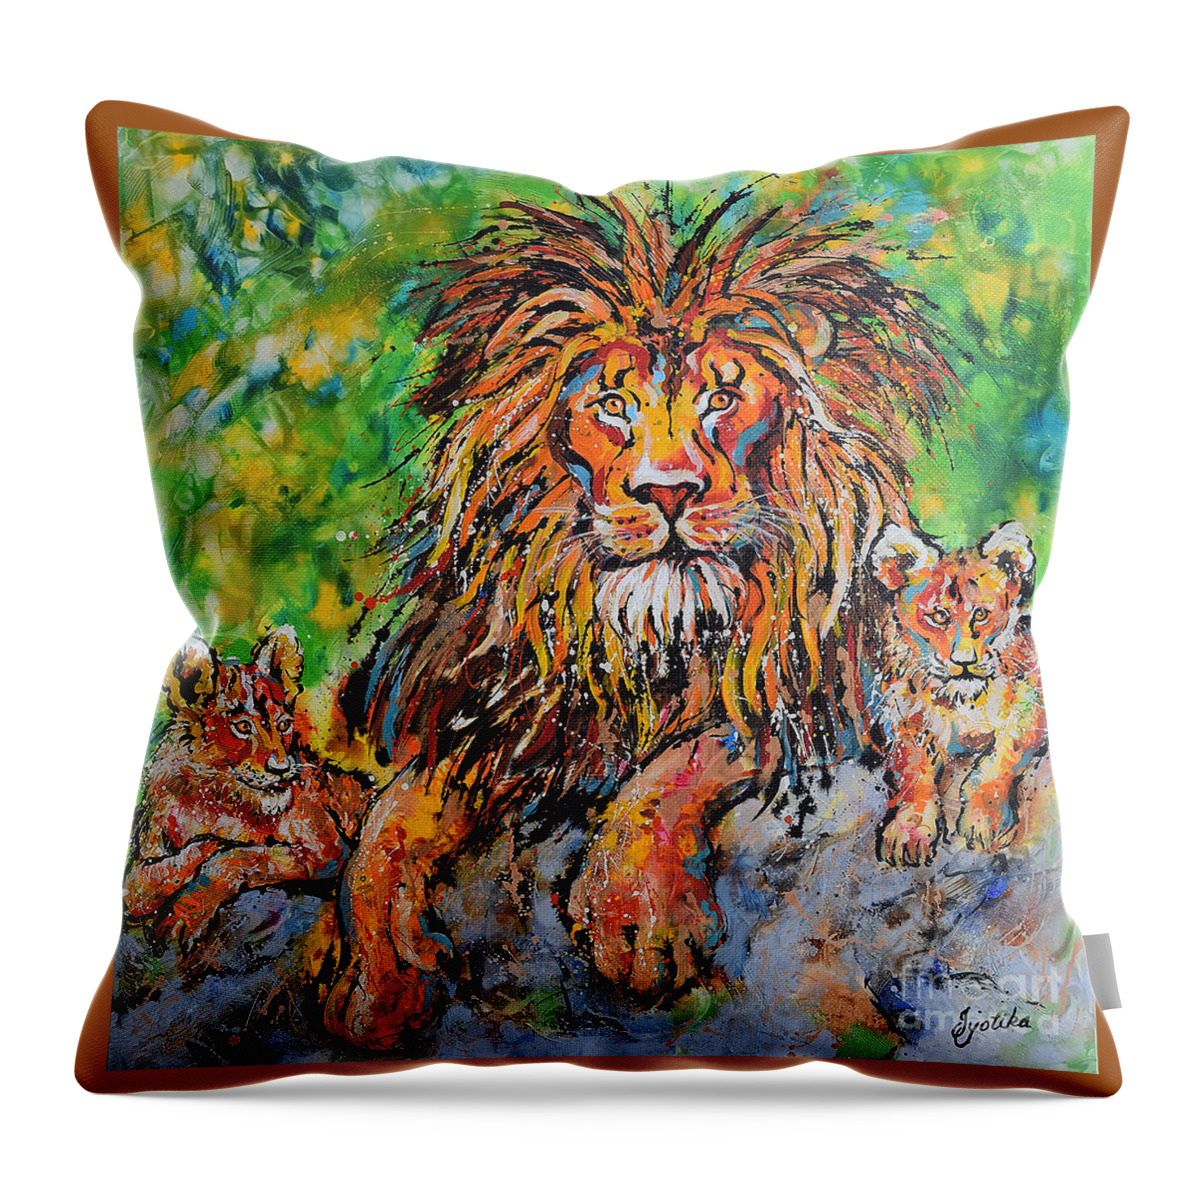  Throw Pillow featuring the painting Lion's Pride by Jyotika Shroff